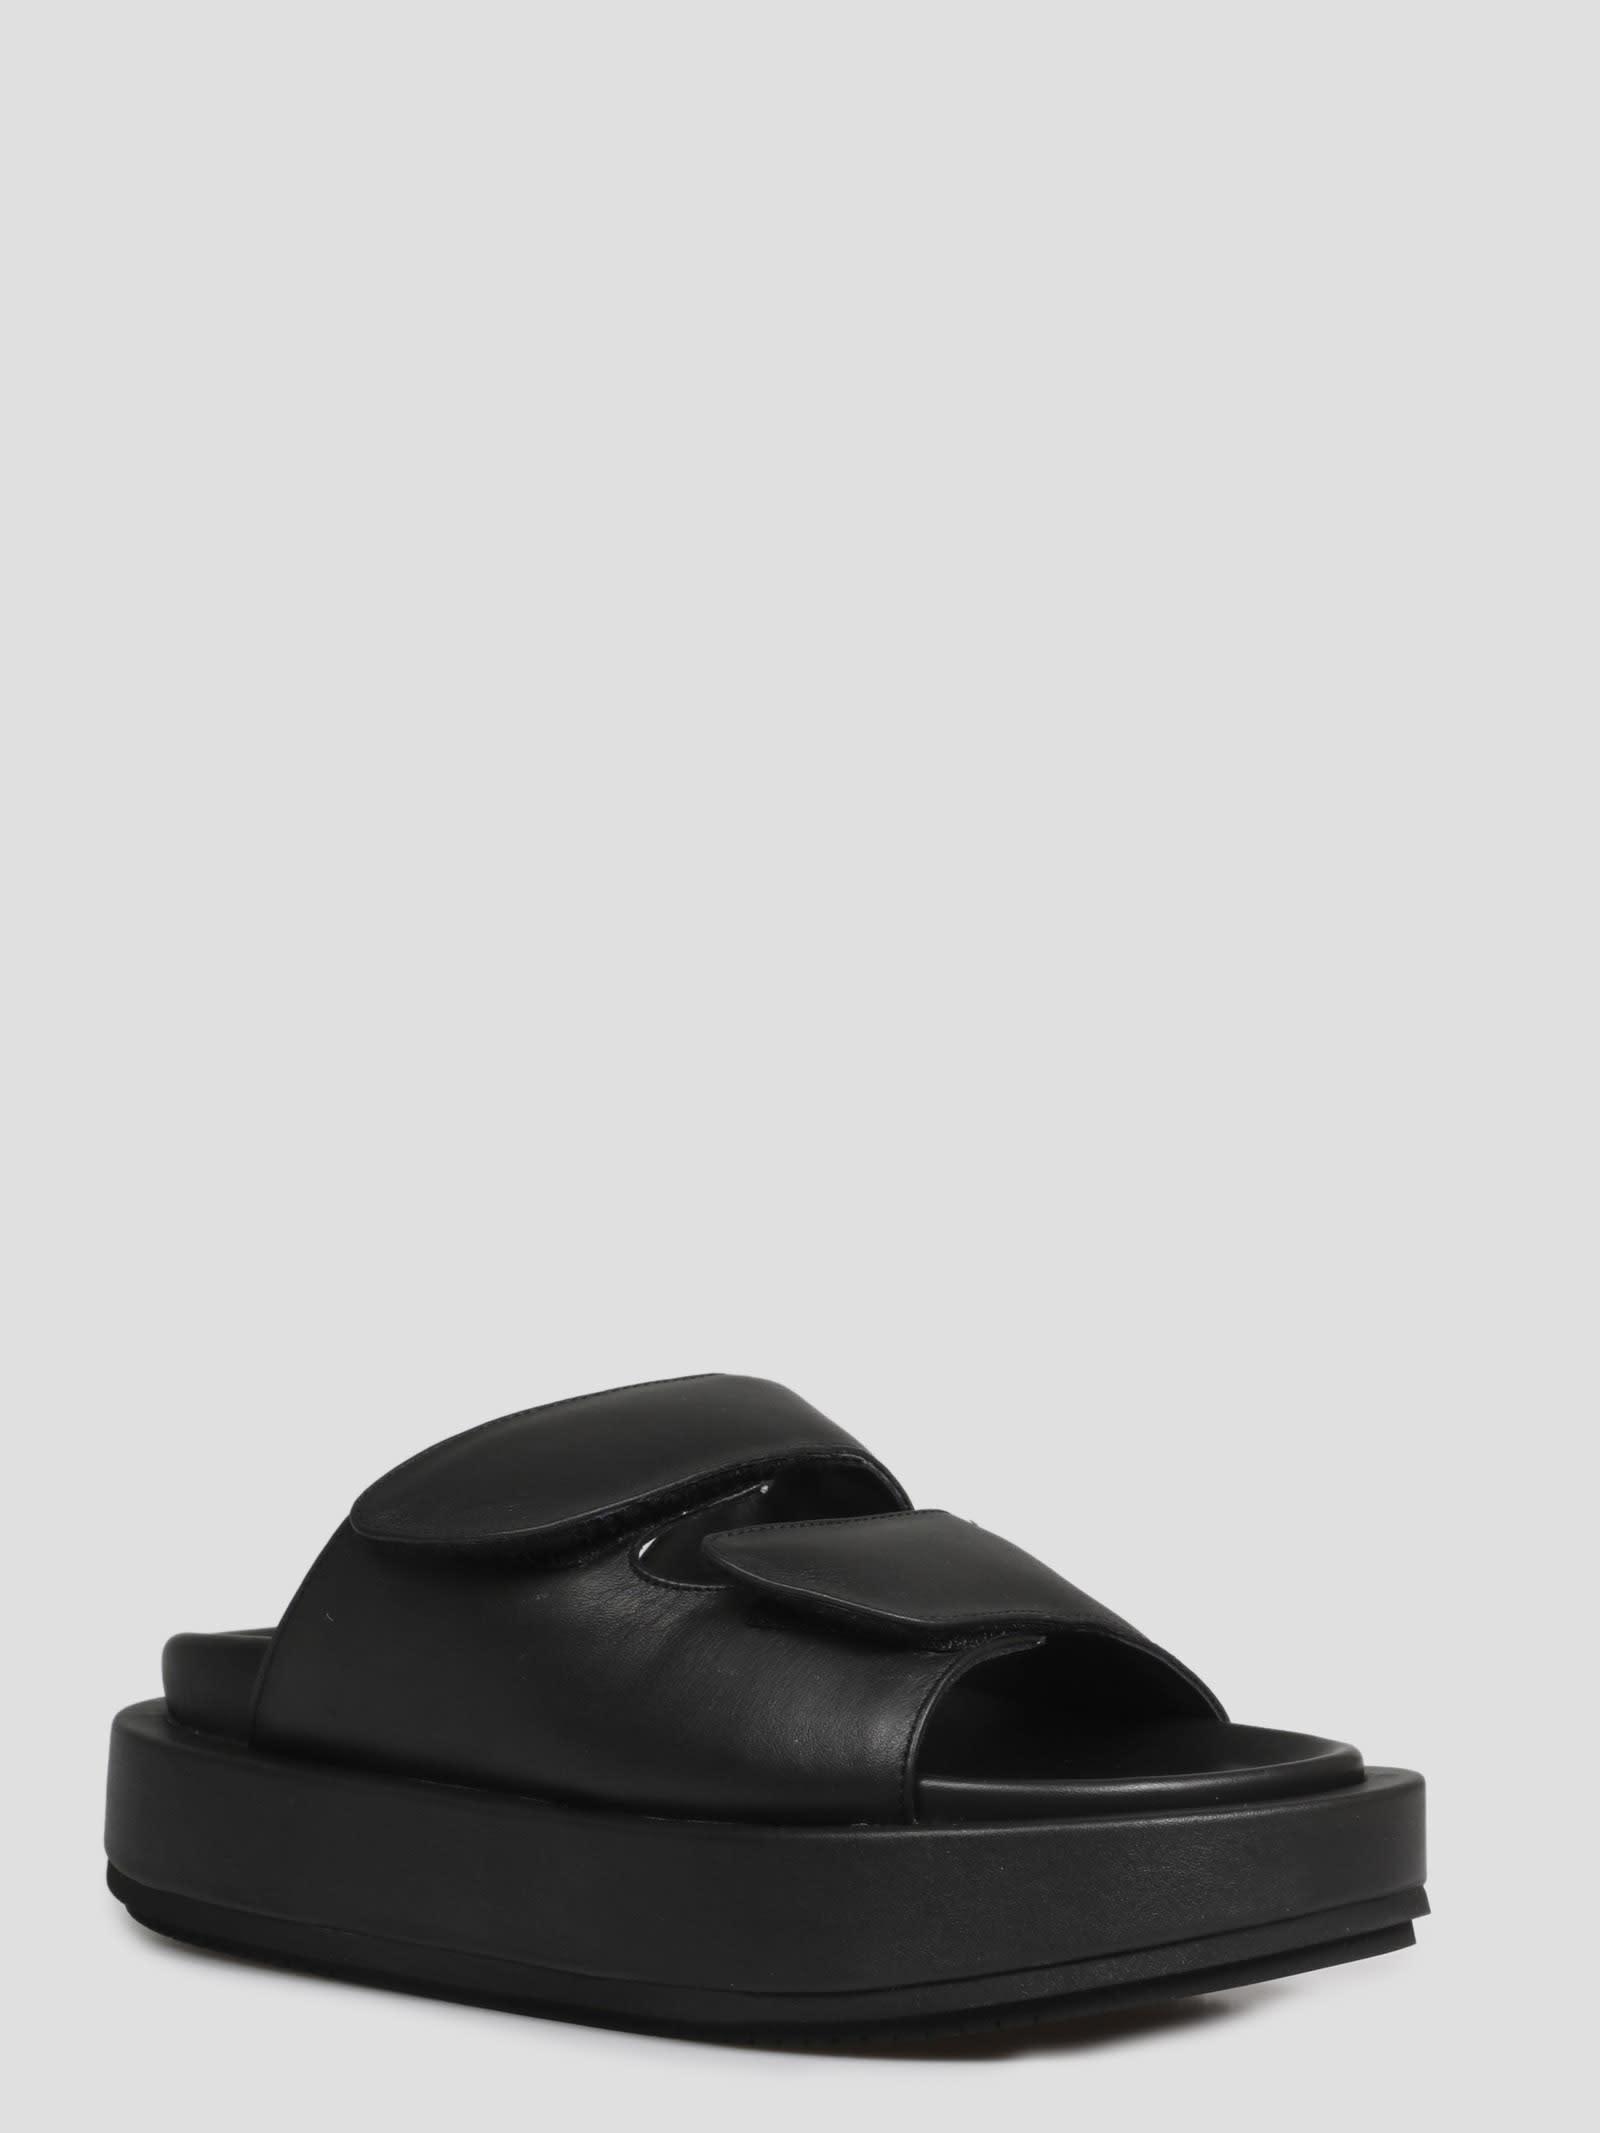 Paloma Barceló Leather Elza Sandals in Black - Lyst